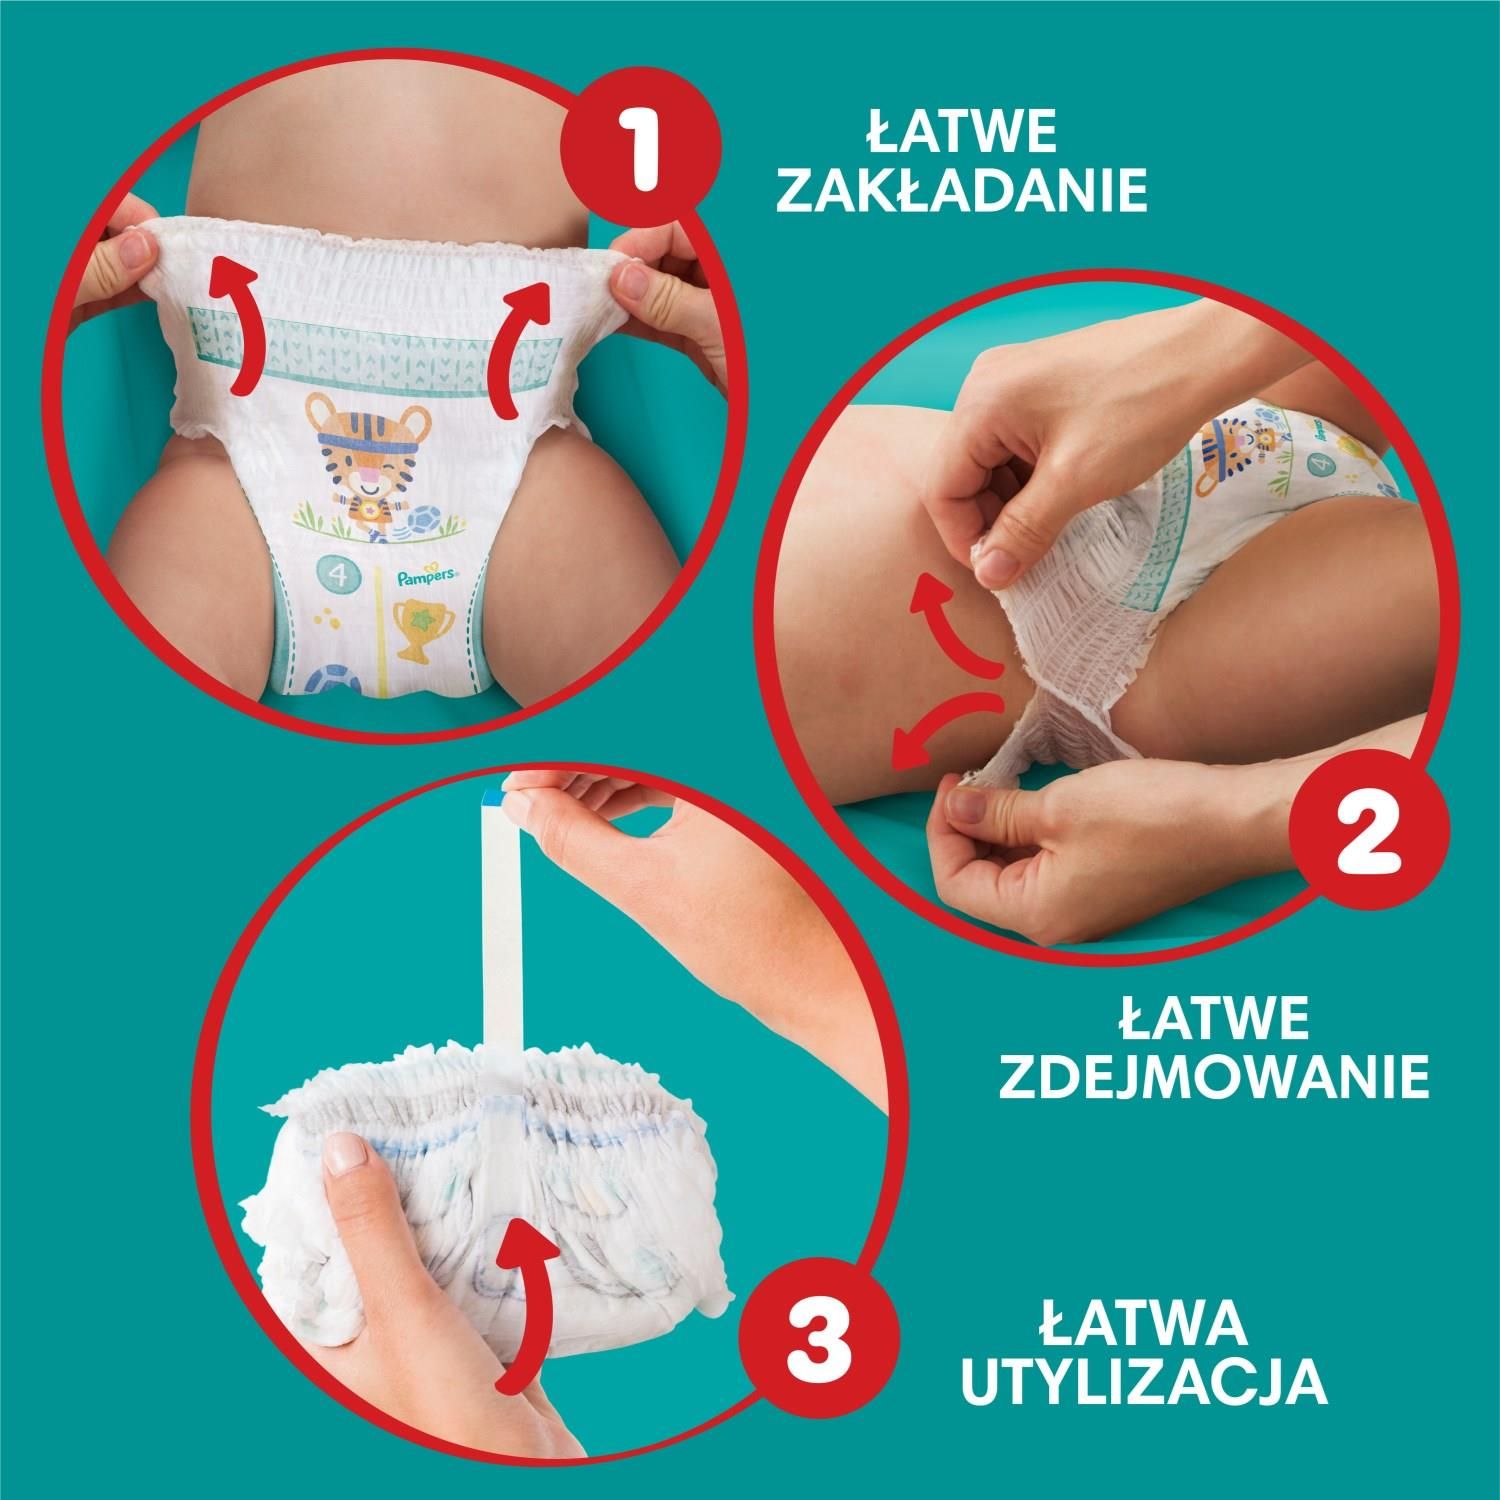 pampers premium care stare a nowe